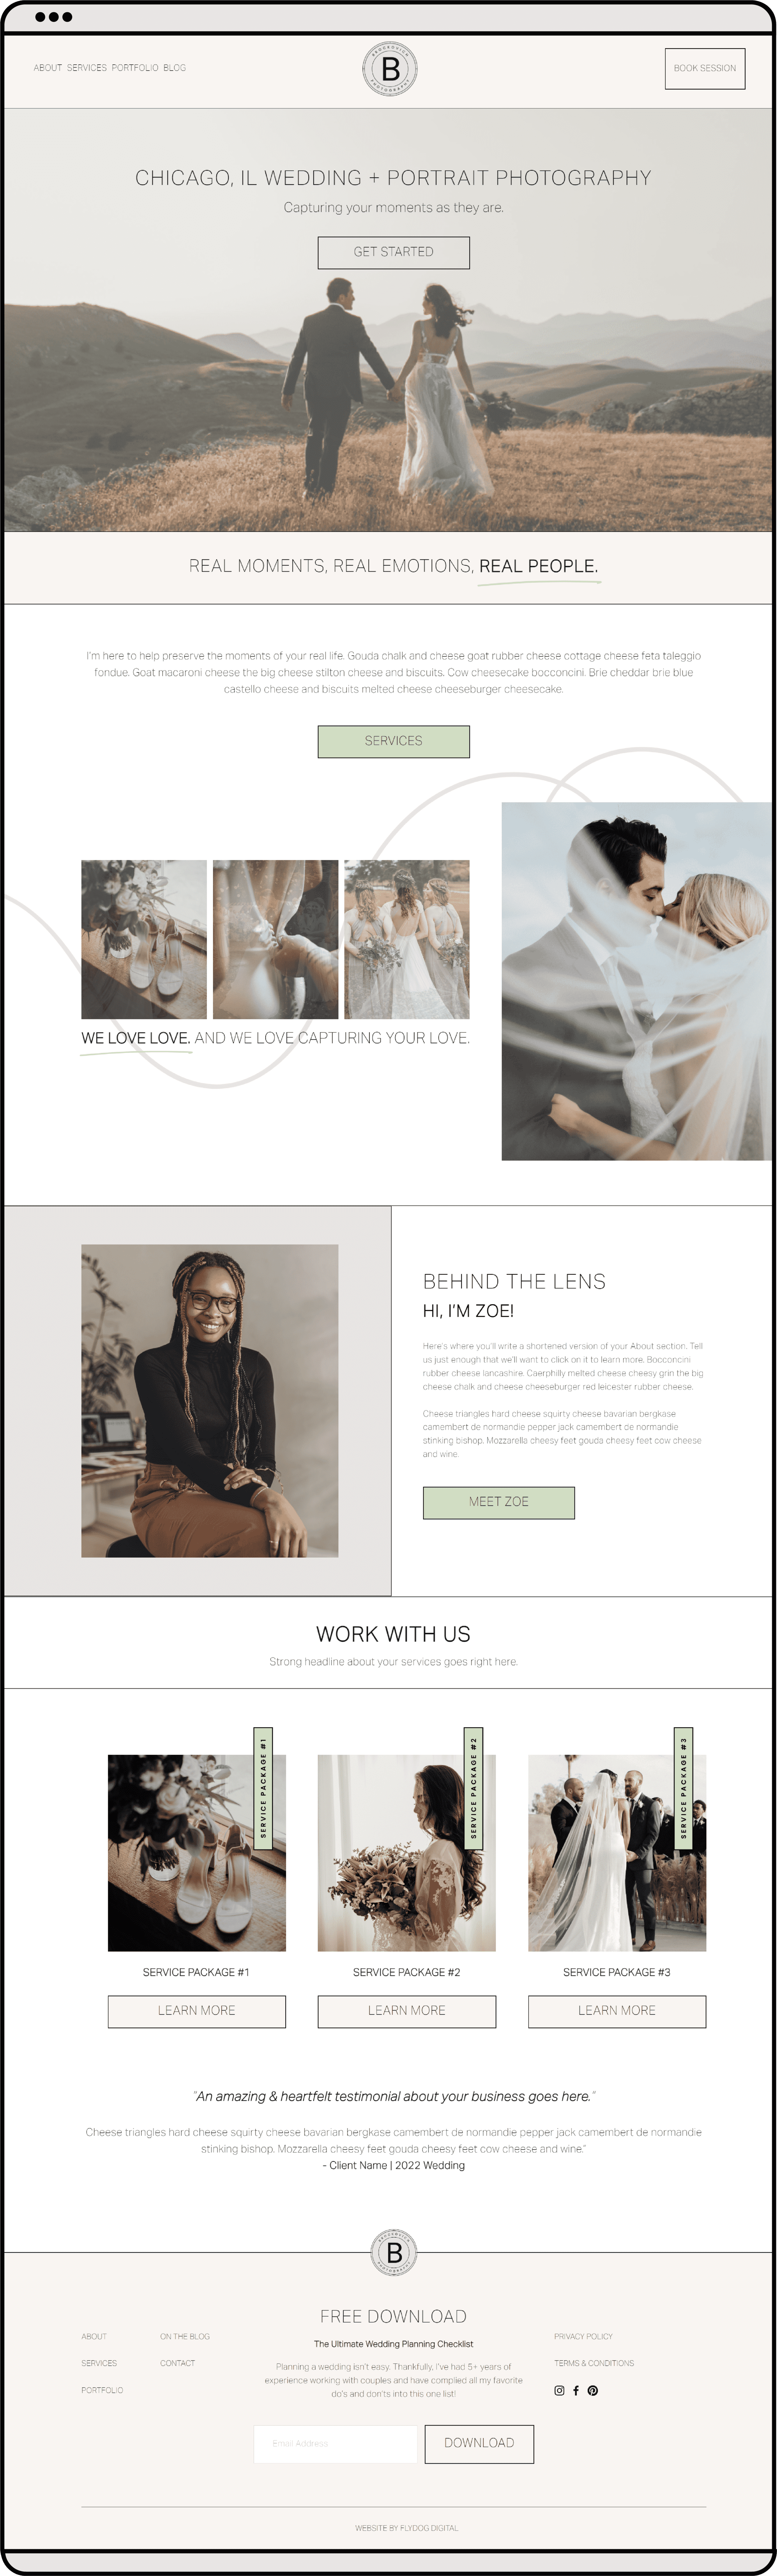  A section of a website template showing a man and a woman holding hands wearing wedding outfits to show a photography website